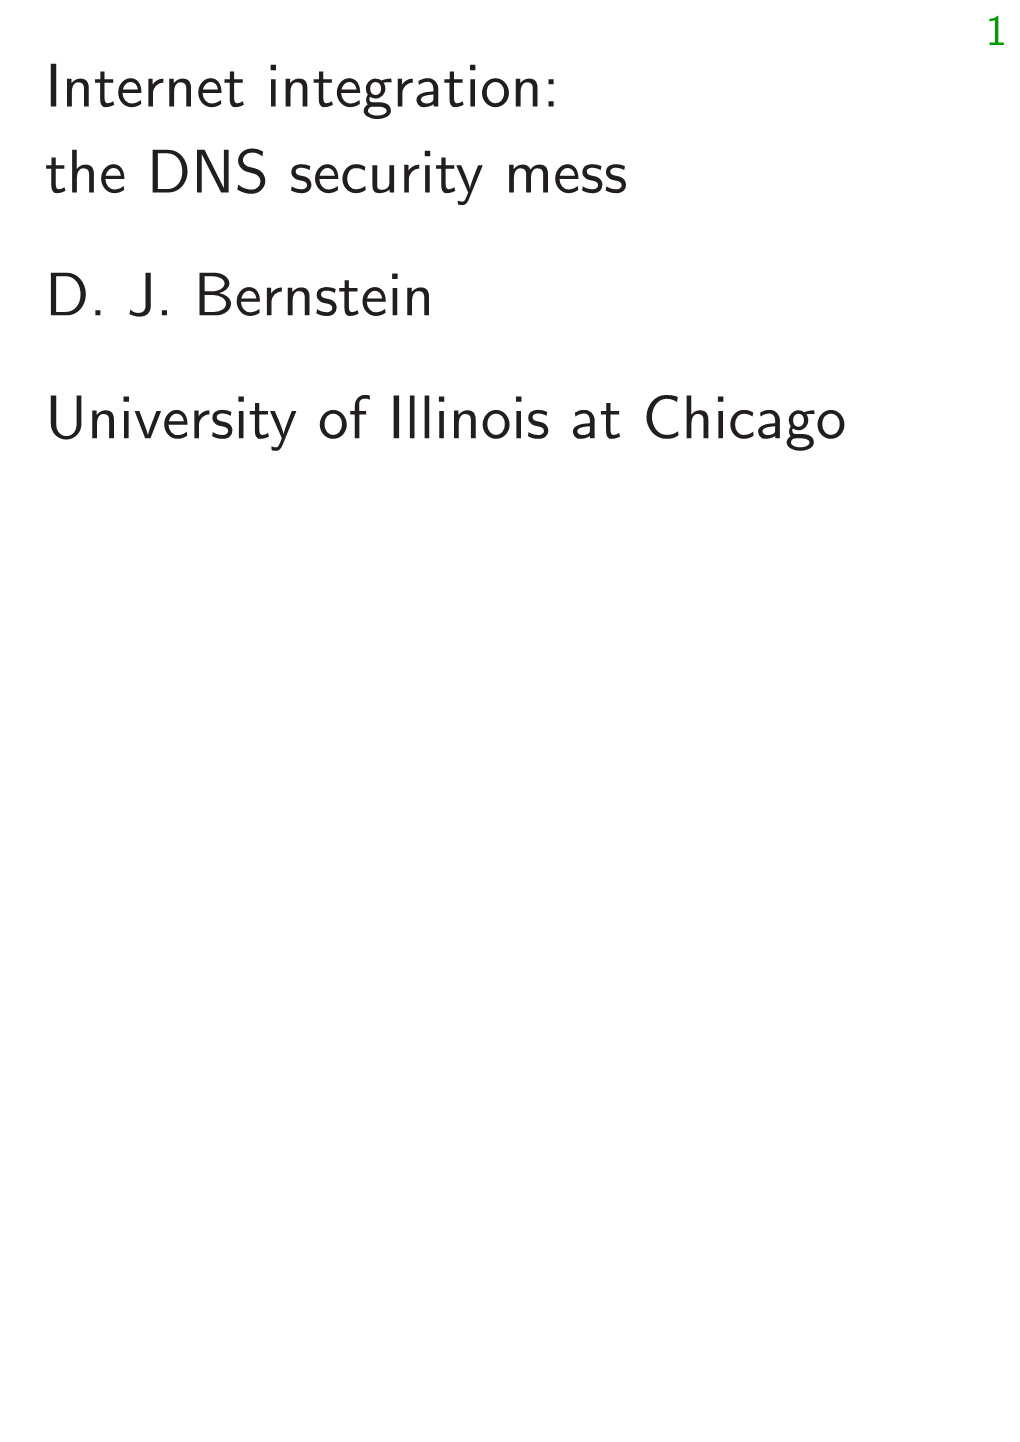 Internet Integration: the DNS Security Mess D. J. Bernstein University of Illinois at Chicago 2 the Domain Name System Uic.Edu Wants to See